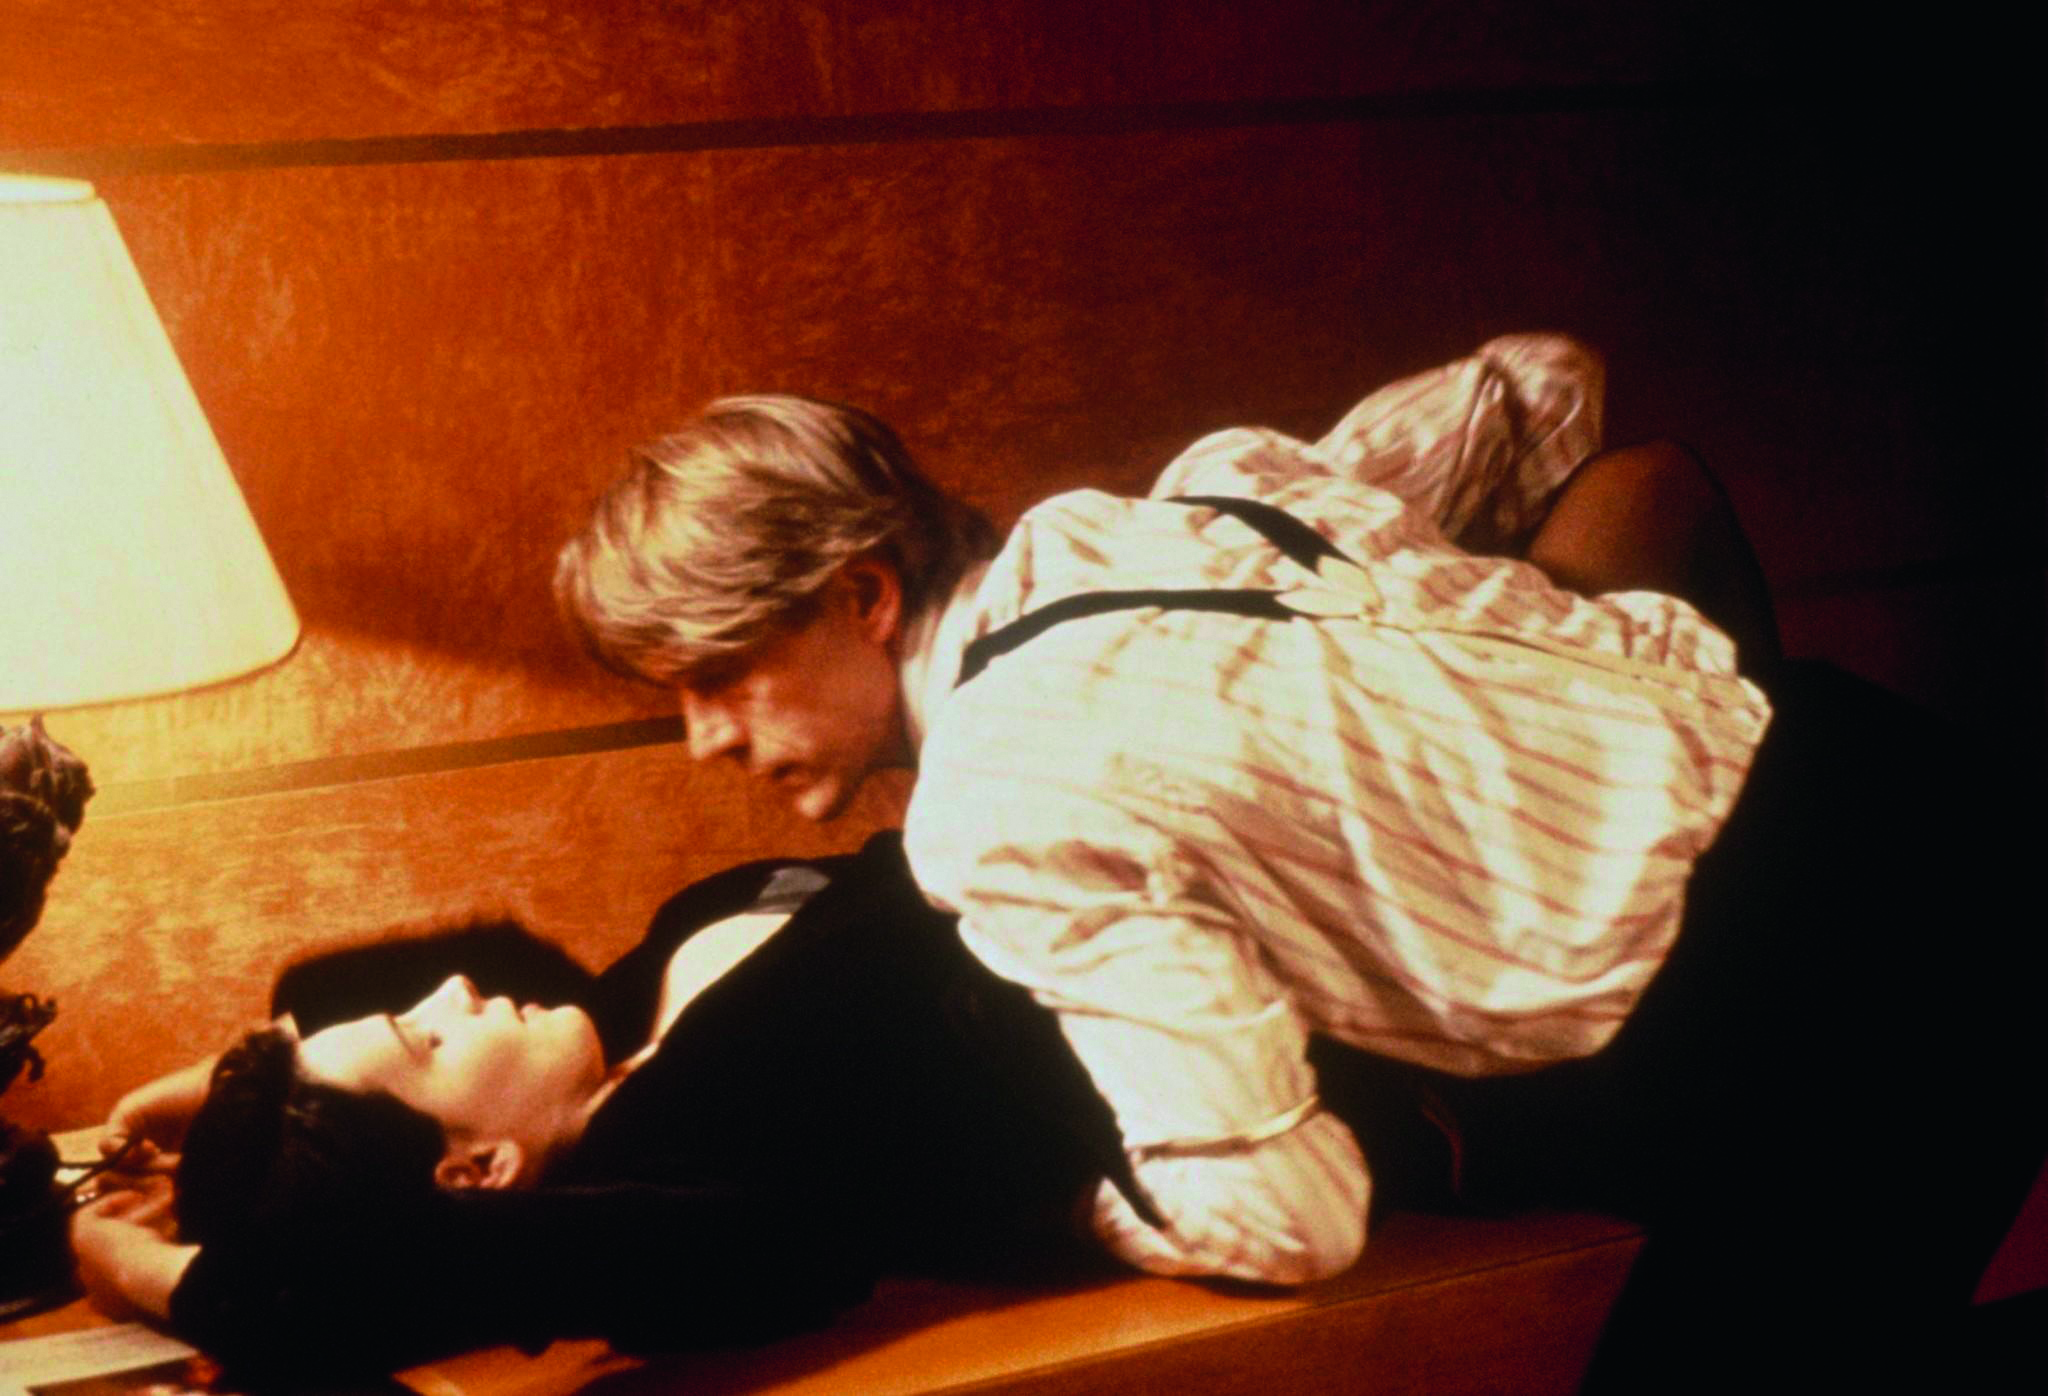 still-of-juliette-binoche-and-jeremy-irons-in-damage-1992-large-picture